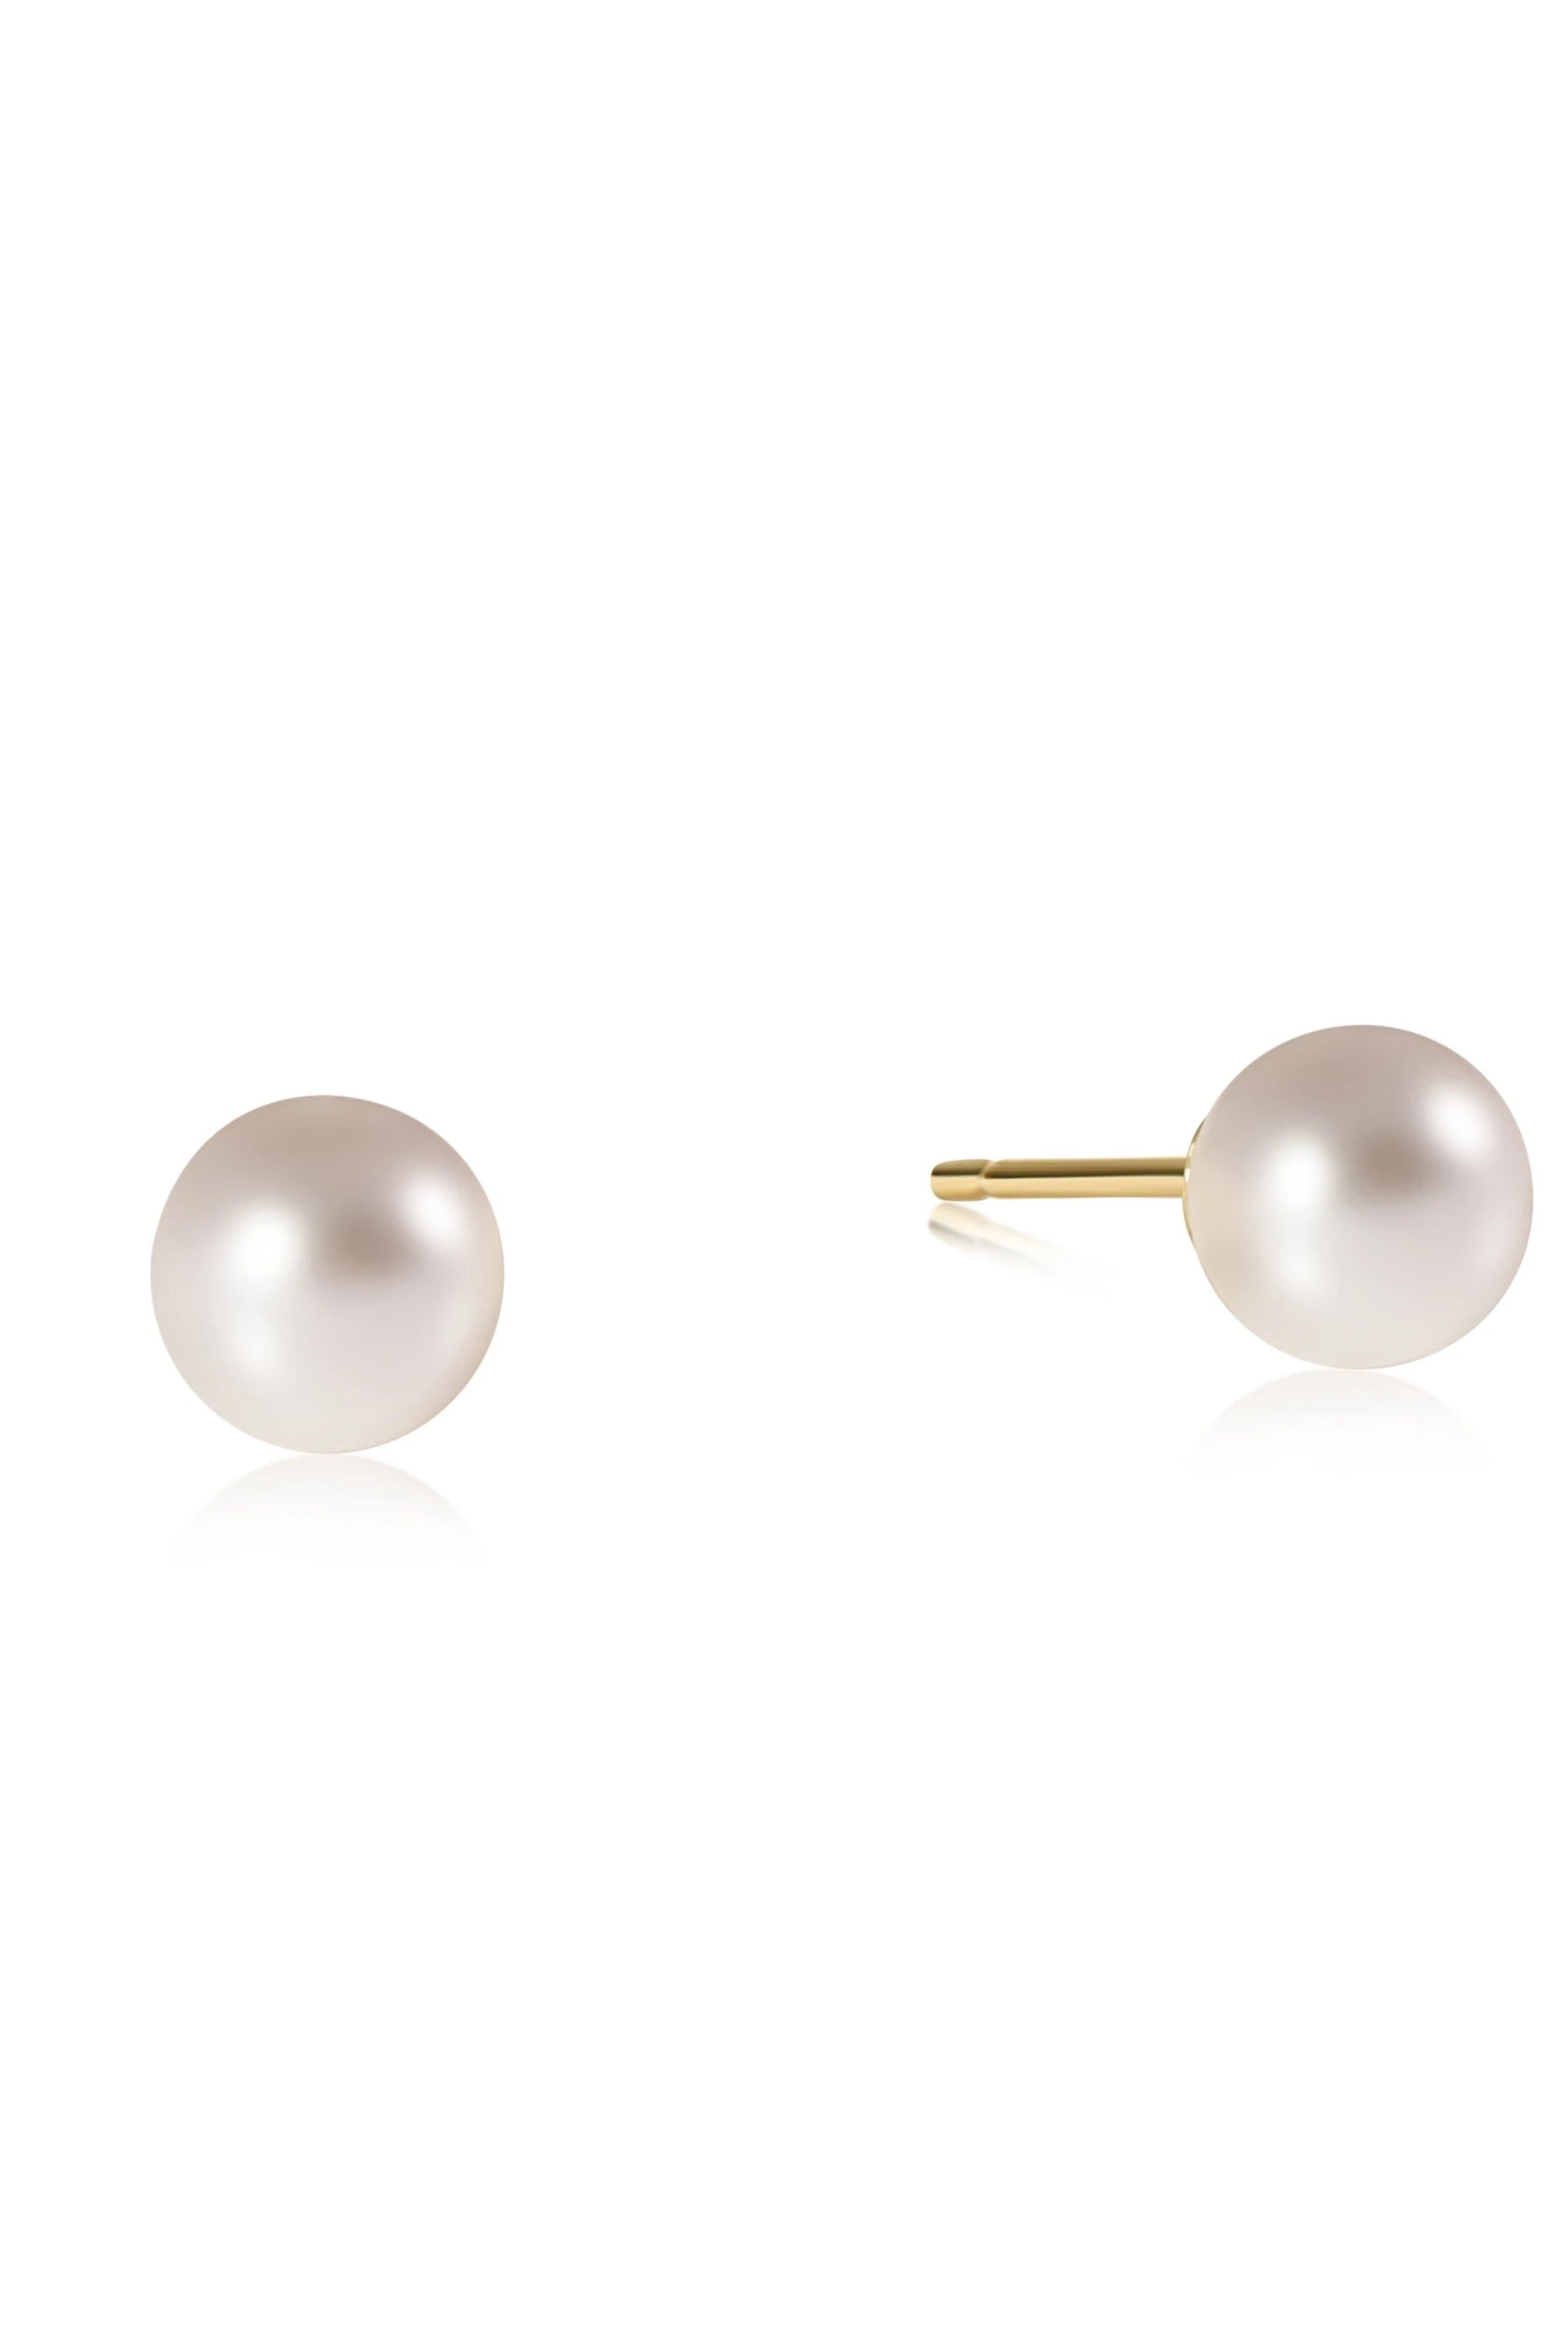 Classic 6mm Pearl Ball Stud-Earrings-eNewton-The Lovely Closet, Women's Fashion Boutique in Alexandria, KY